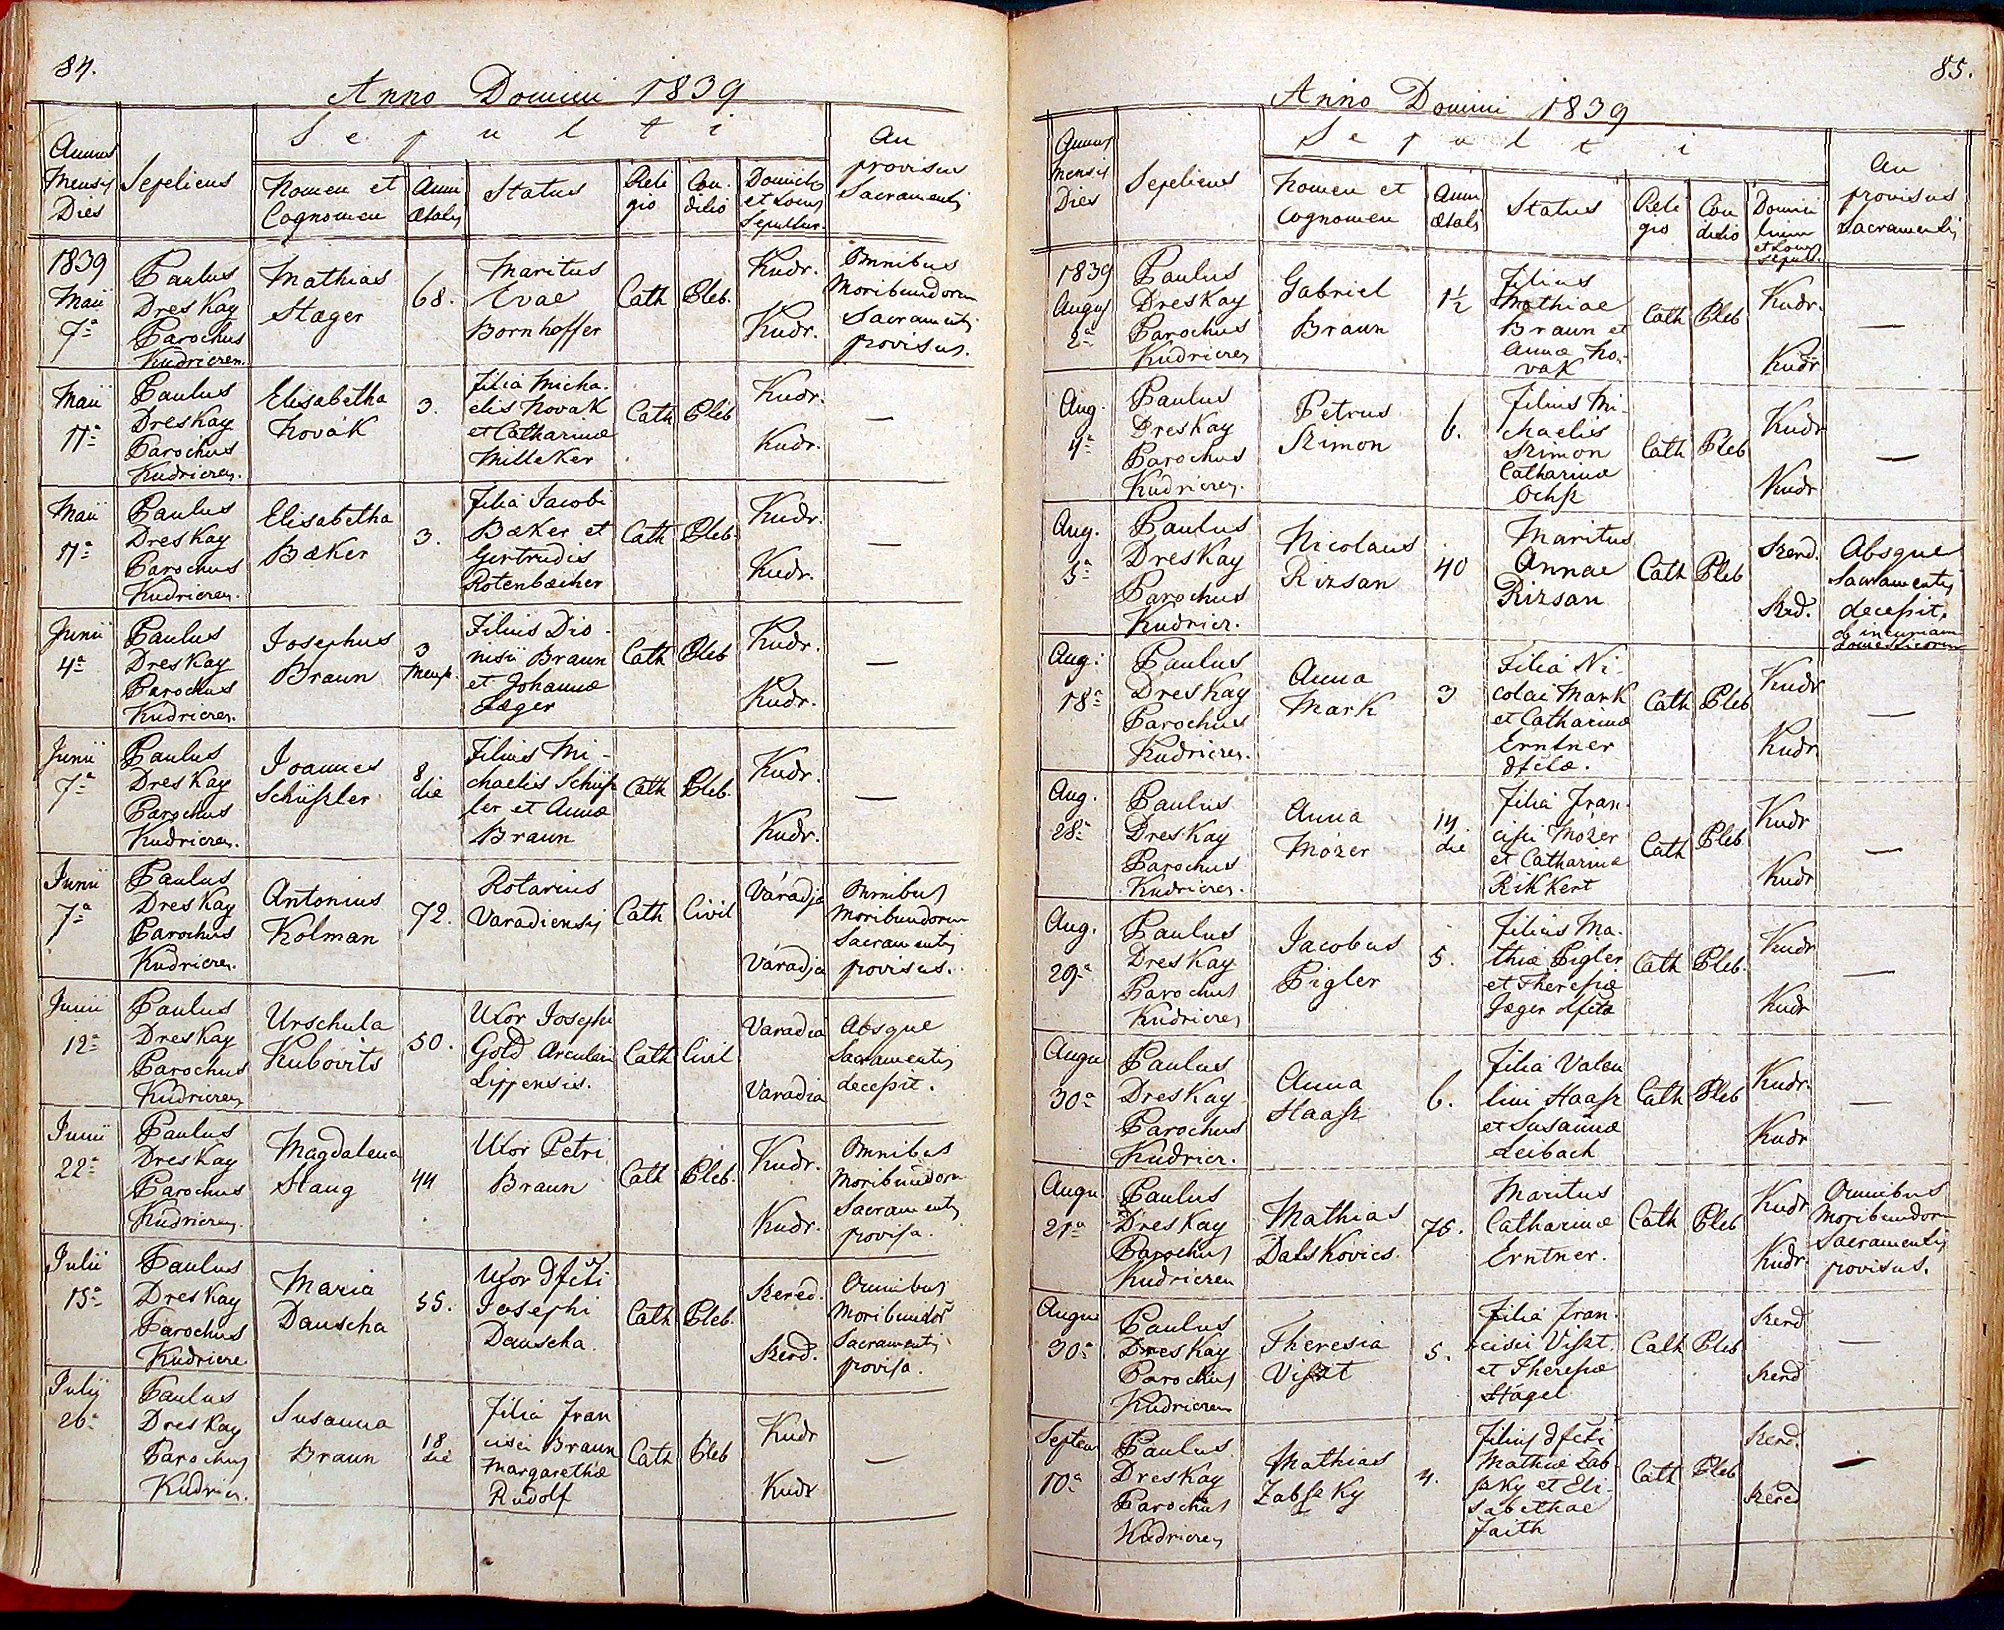 images/church_records/DEATHS/1829-1851D/084 i 085